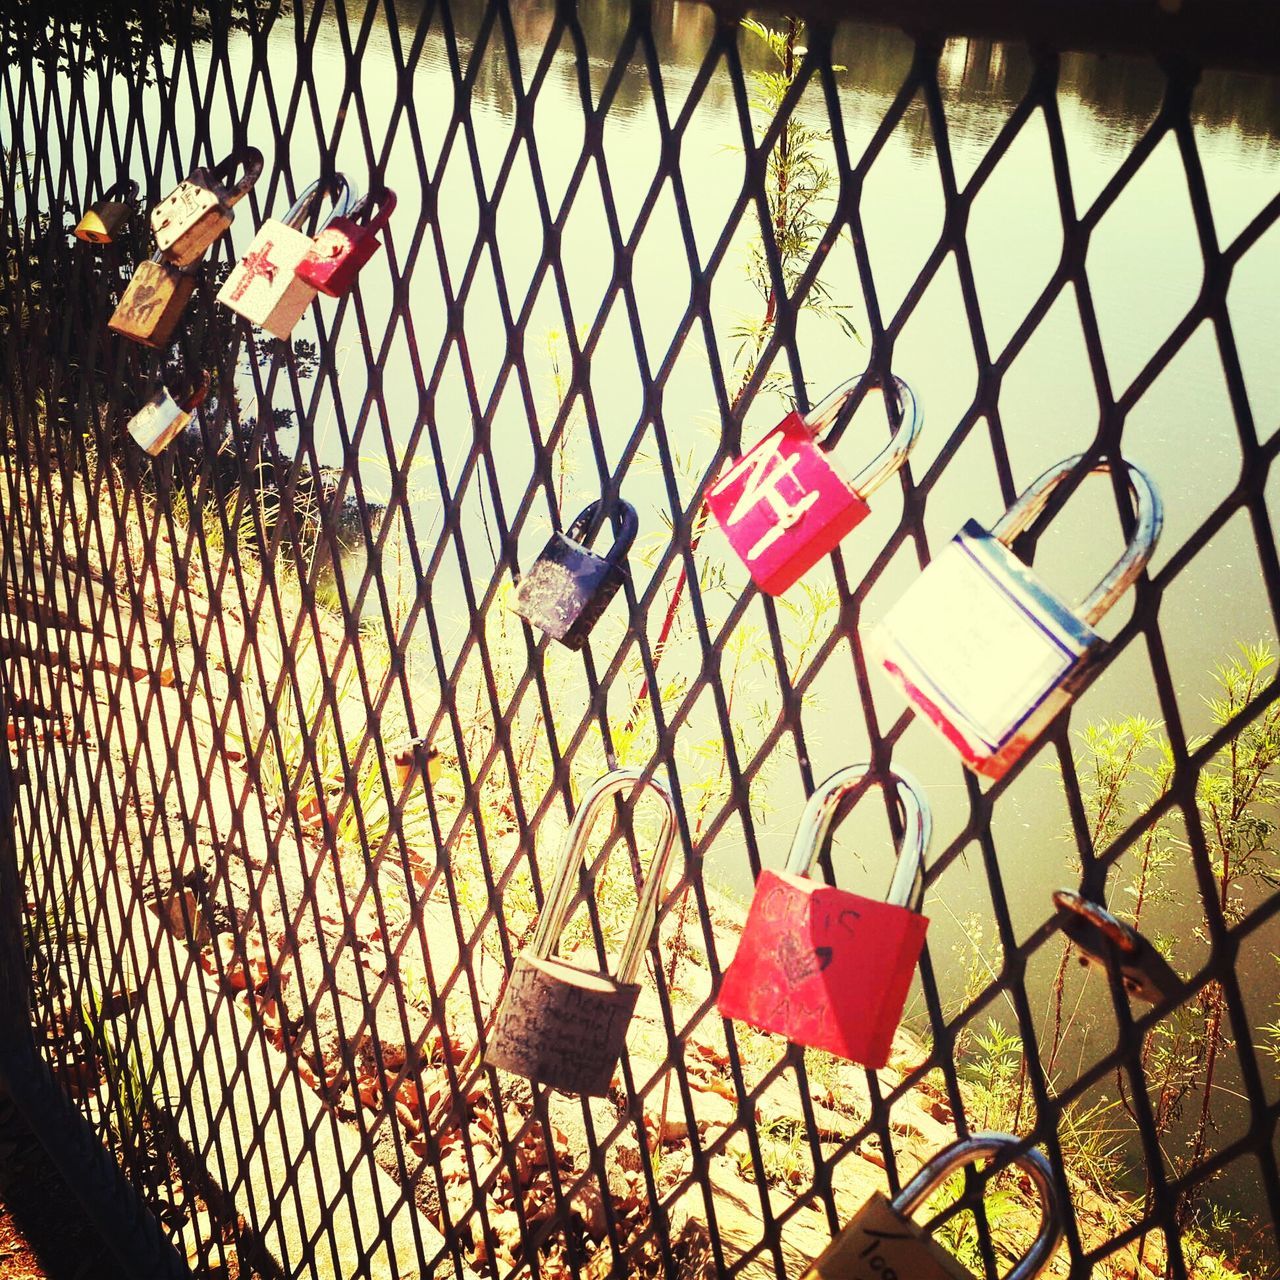 protection, metal, chainlink fence, safety, security, red, padlock, hanging, absence, fence, no people, metallic, playground, day, lock, high angle view, sunlight, empty, chair, outdoors